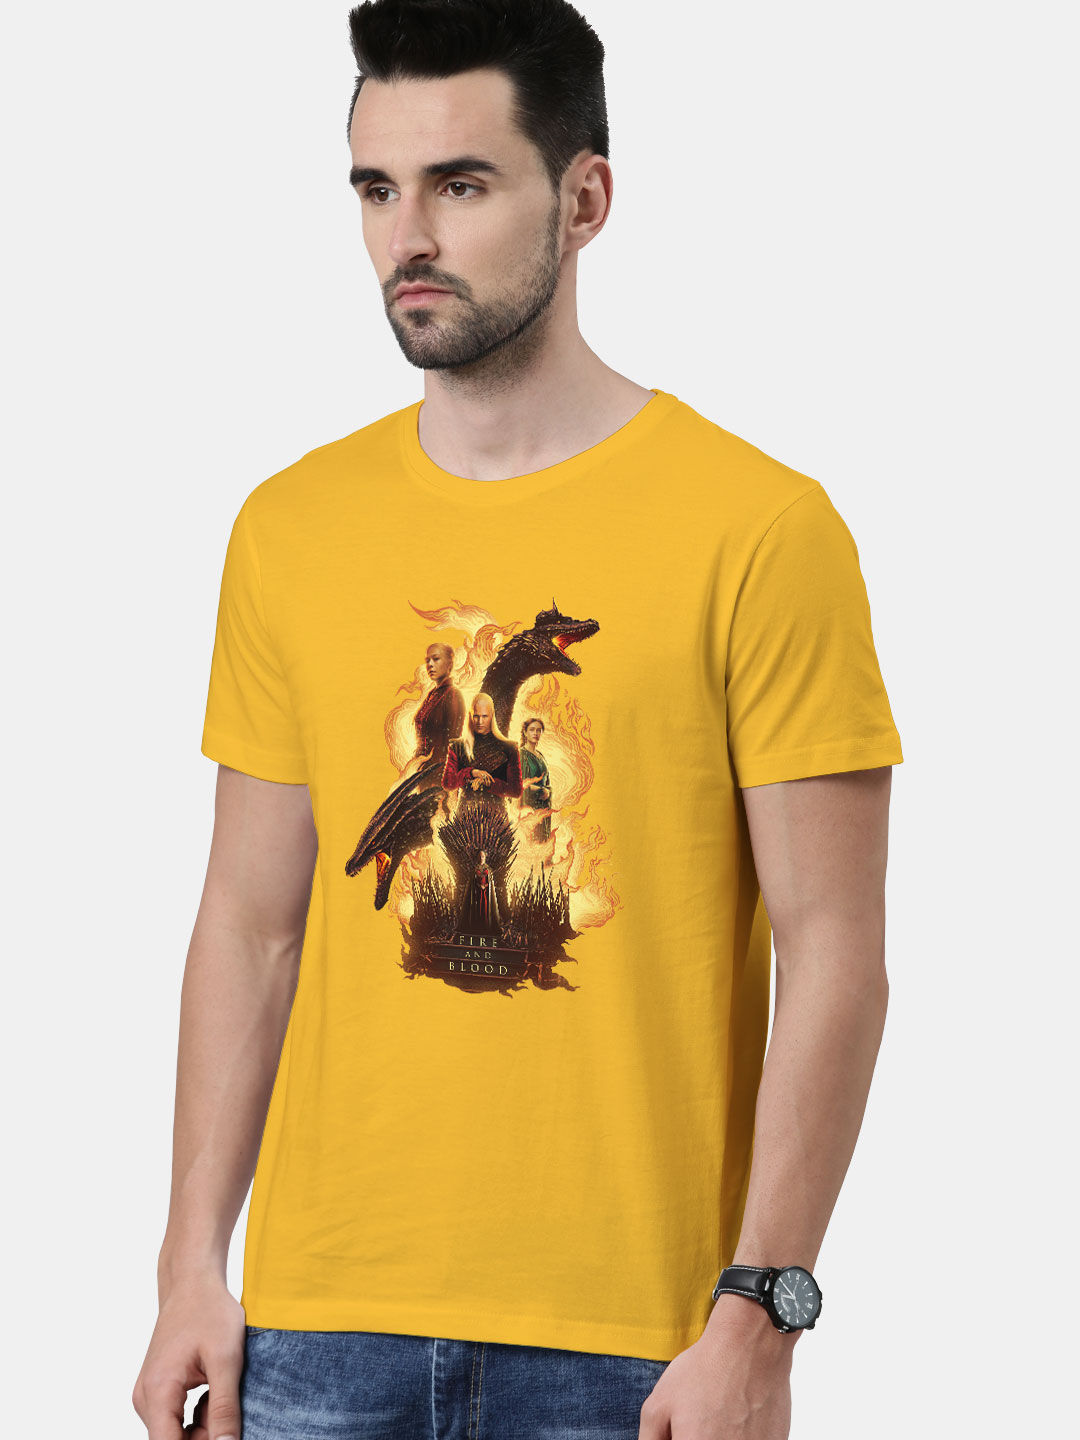 Shop Fire and Blood Team Yellow Printed Mens T-Shirt Online | Macmerise|  Mens T-Shirt Size : M Color : Yellow